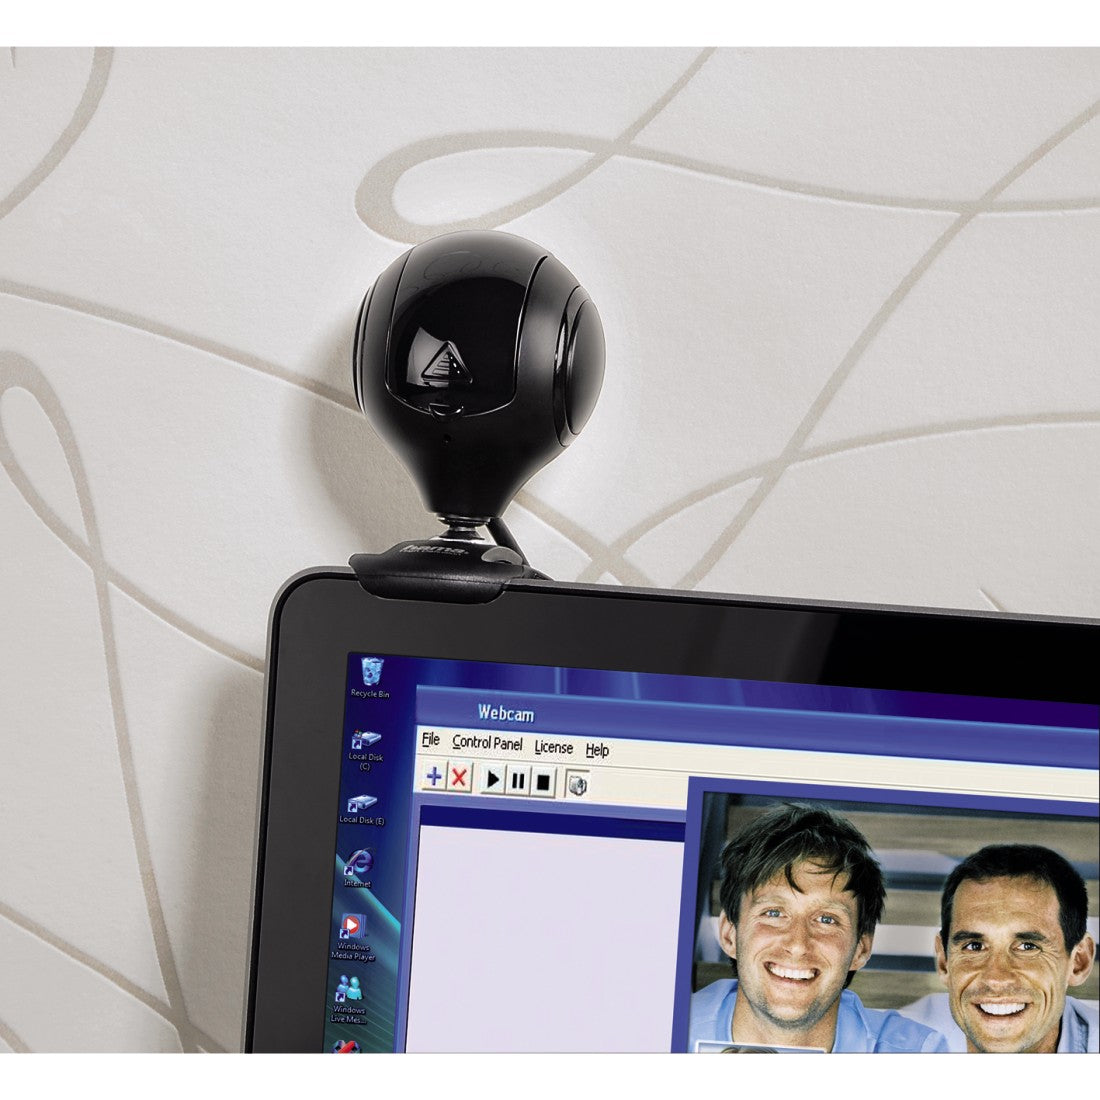 Hama 720P HD Spy Protect Webcam - Black | 539502 from Hama - DID Electrical